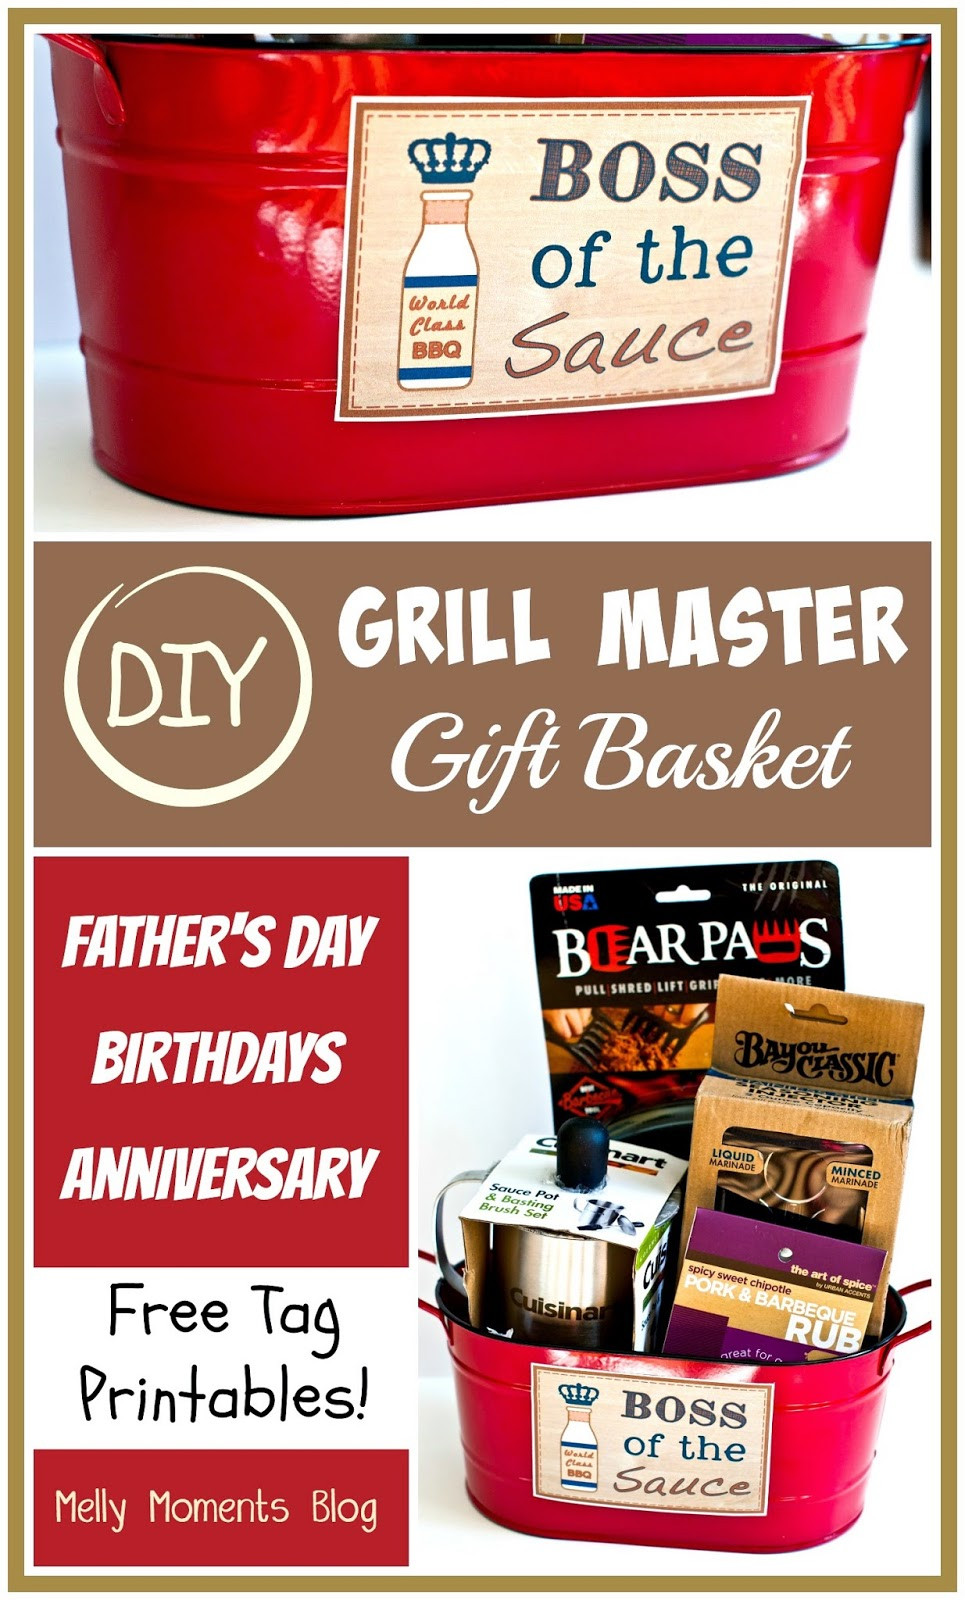 Barbecue Gift Basket Ideas
 DIY Gift Basket for Men Grill Master Edition